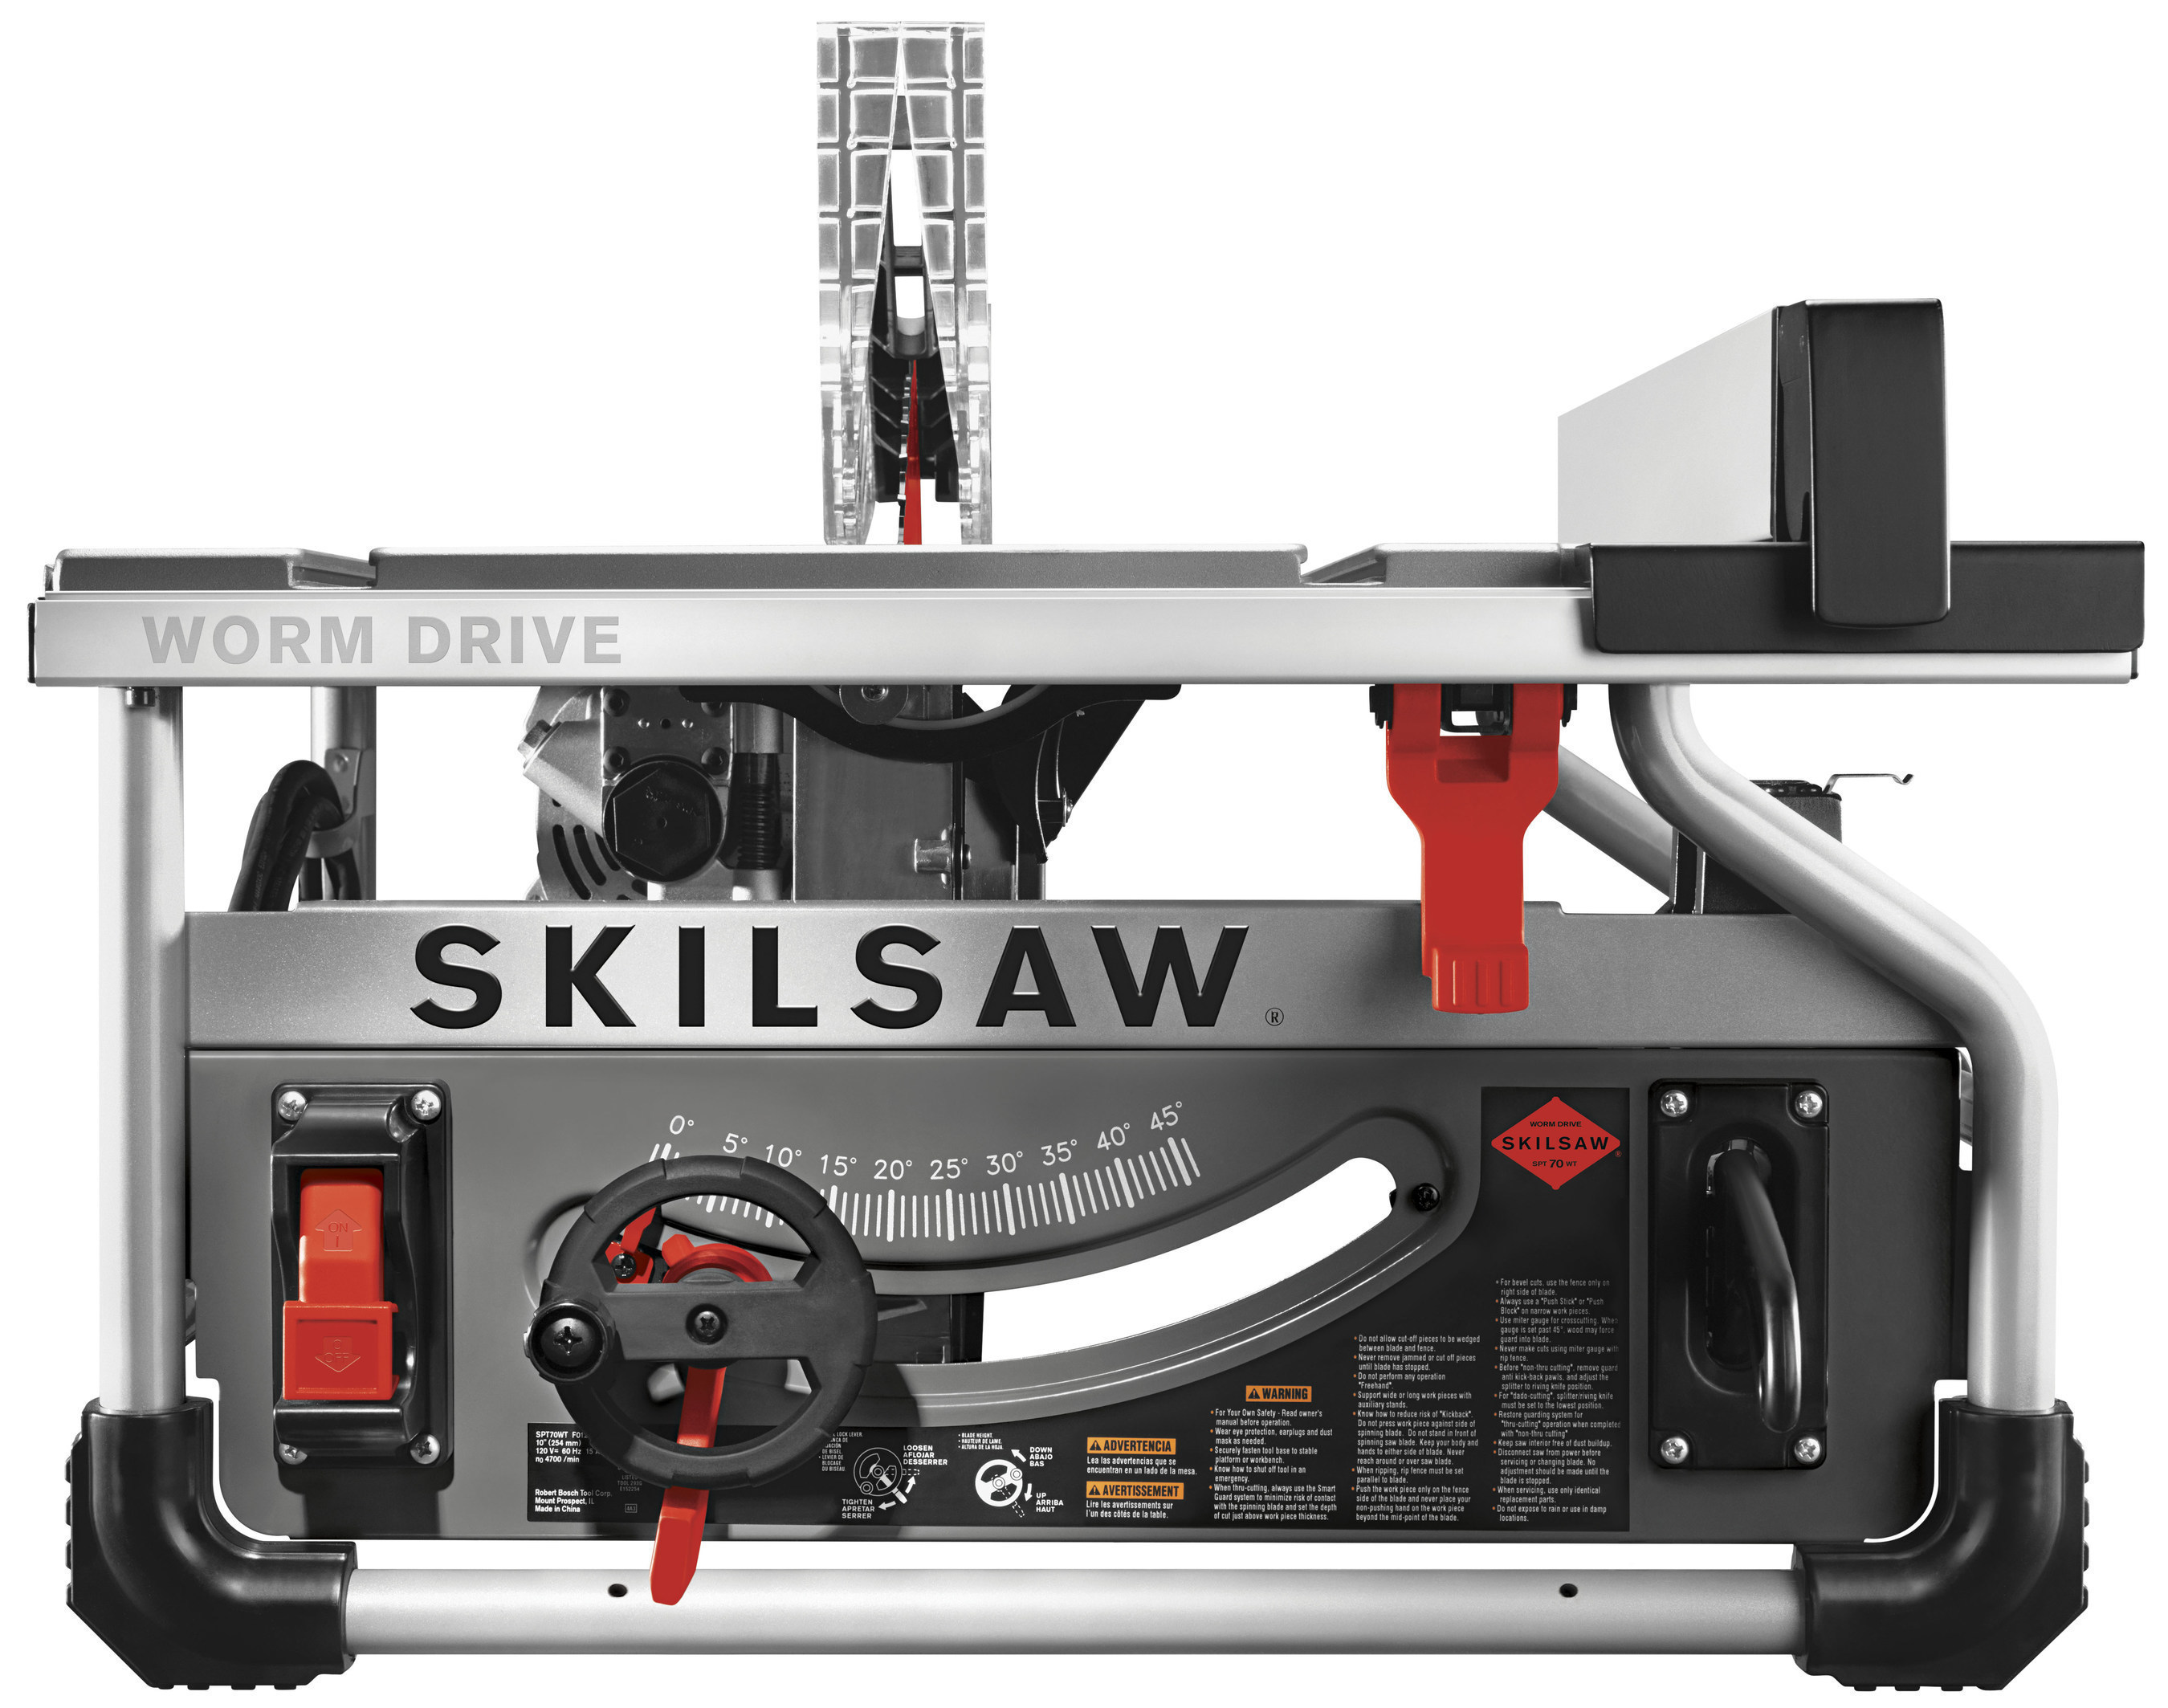 Increased power and durability are key features that pros continue to demand from every tool on the jobsite. With this in mind, SKILSAW introduces the first-ever 10 in. Worm Drive table saw. Known for its deep heritage in engineering Worm Drive handheld saws, the new SKILSAW SPT70WT-22 offers great rip cutting performance and reliability while maintaining a portable size.